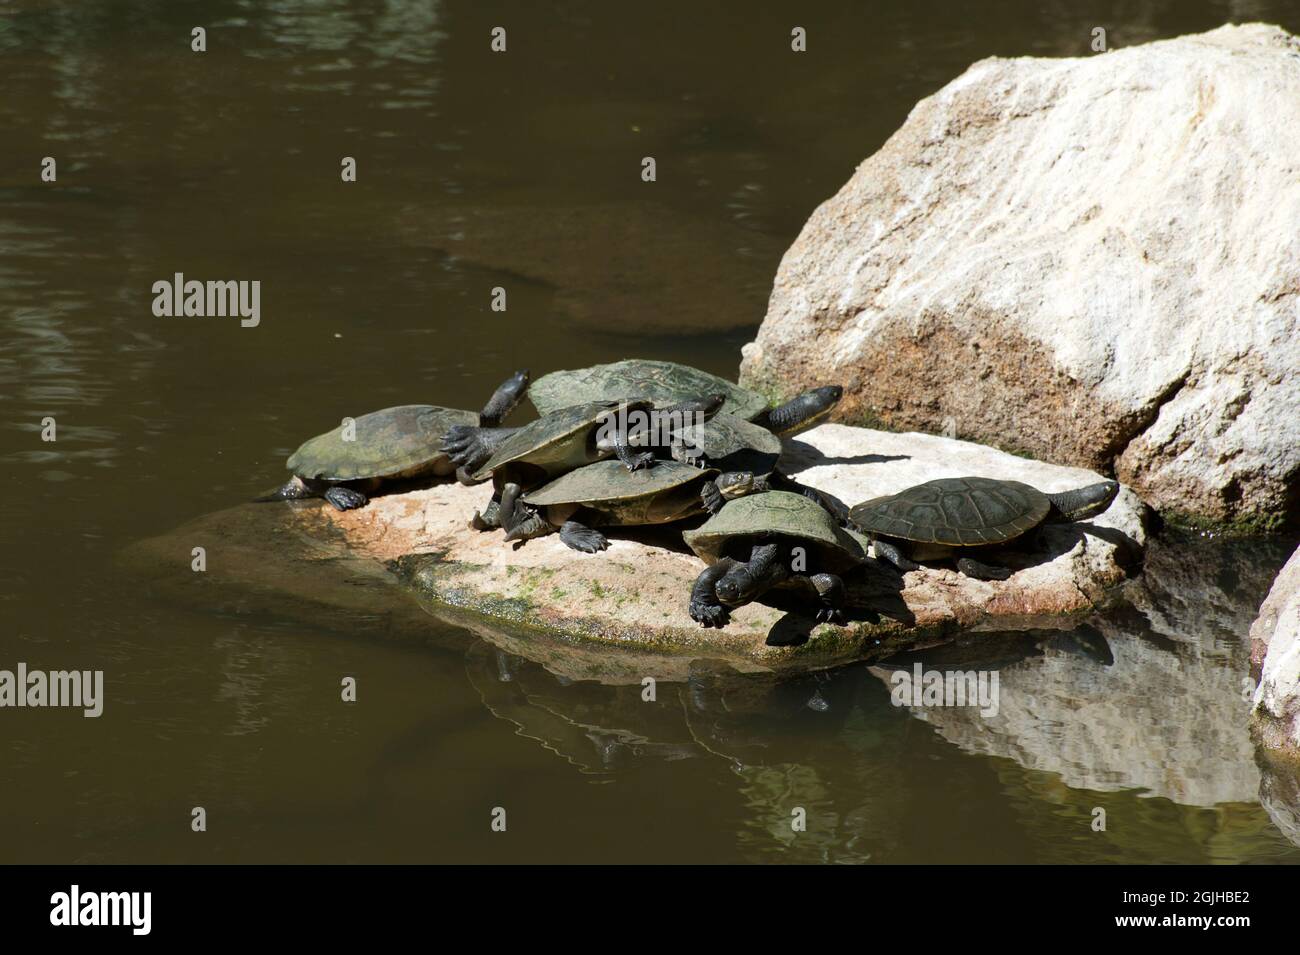 These Long Necked Turtles (Chelodina Longicollis) were having a swingers party on this rock in the pond at Melbourne Zoo in Victoria, Australia. Stock Photo